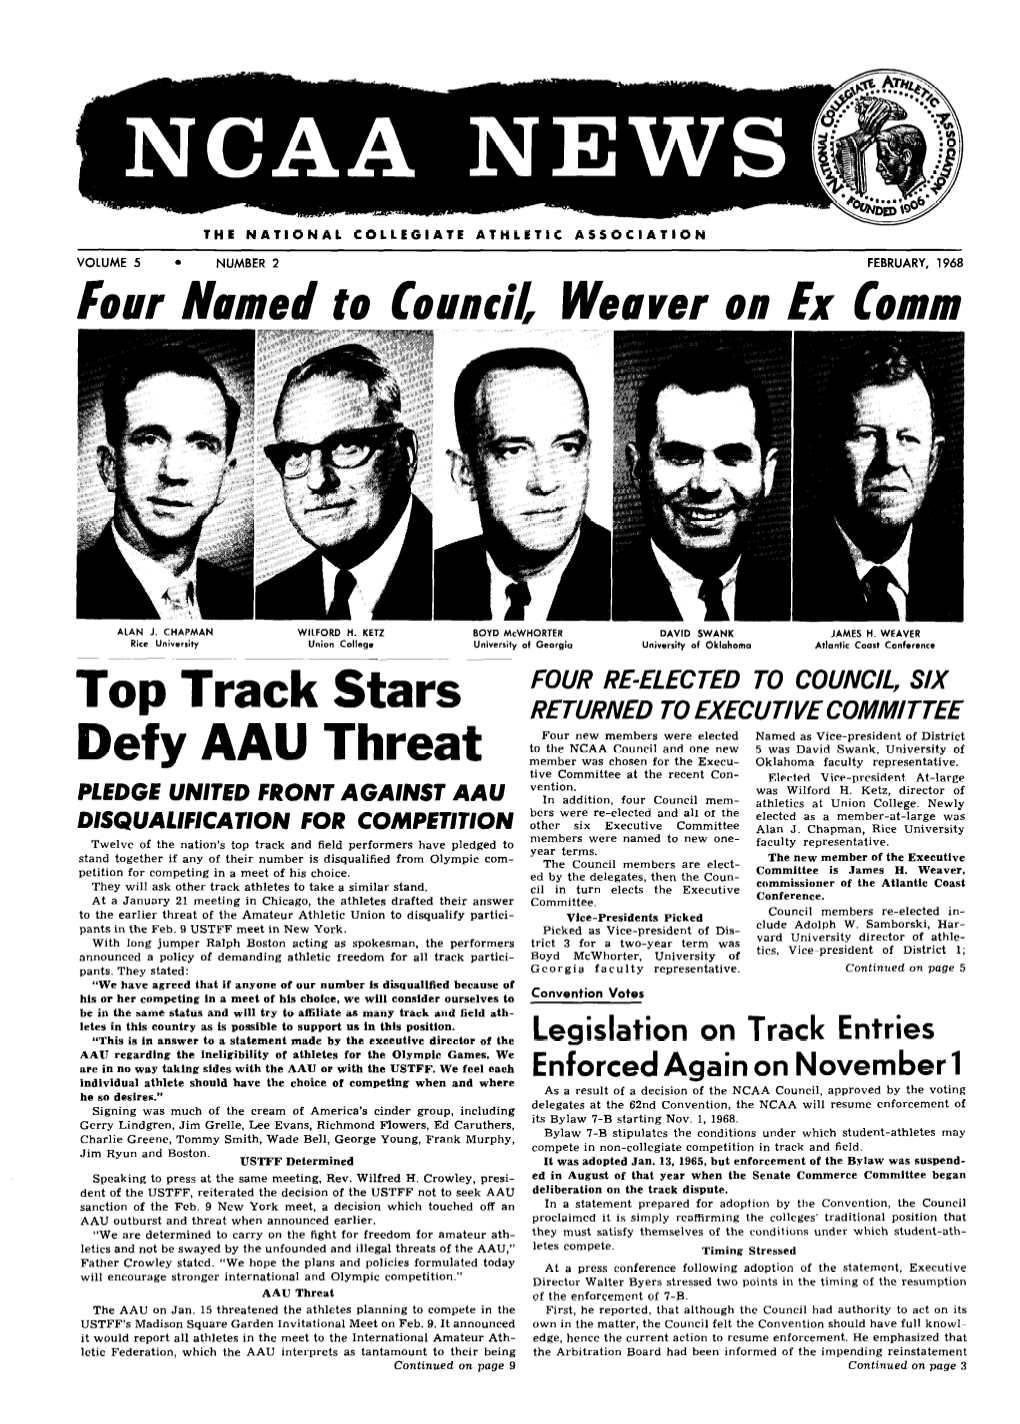 FEBRUARY, 1968 Four Illumed to Council, Weaver on Ex Comm